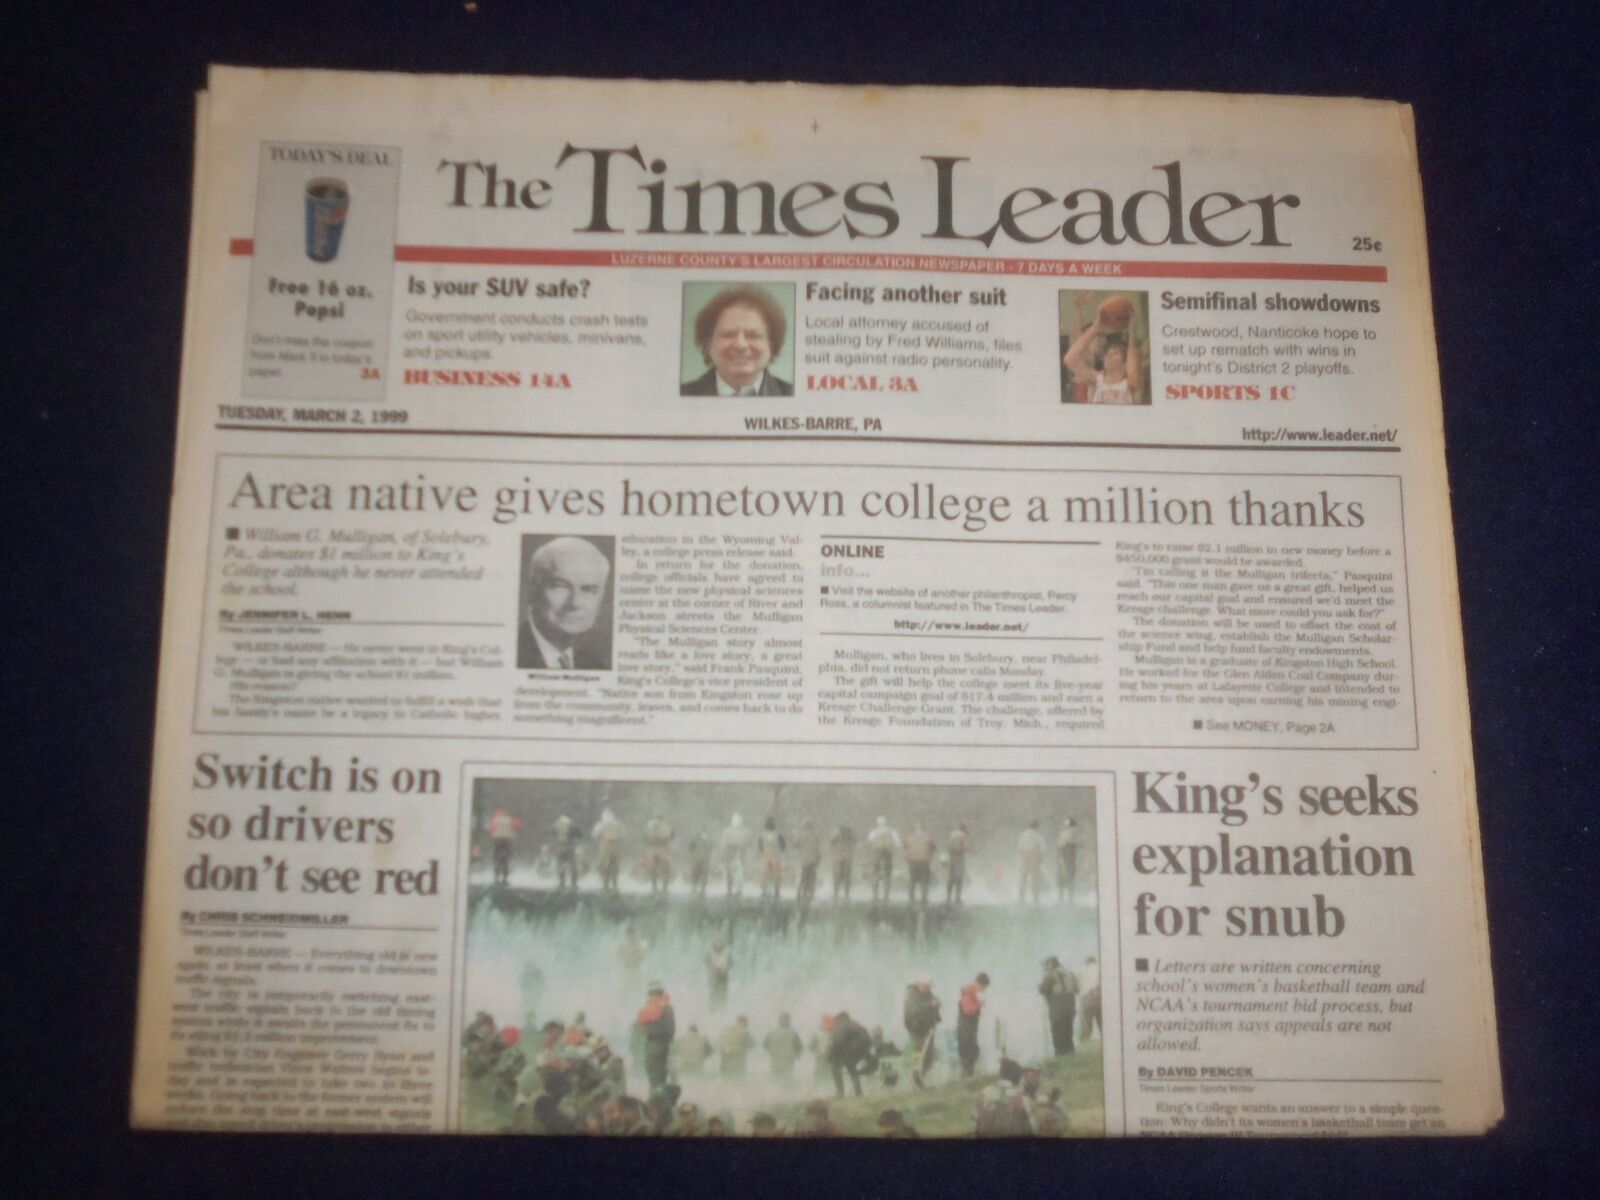 1999 MAR 2 WILKES-BARRE TIMES LEADER - KING'S COLLEGE SNUBBED FOR NCAA - NP 8248